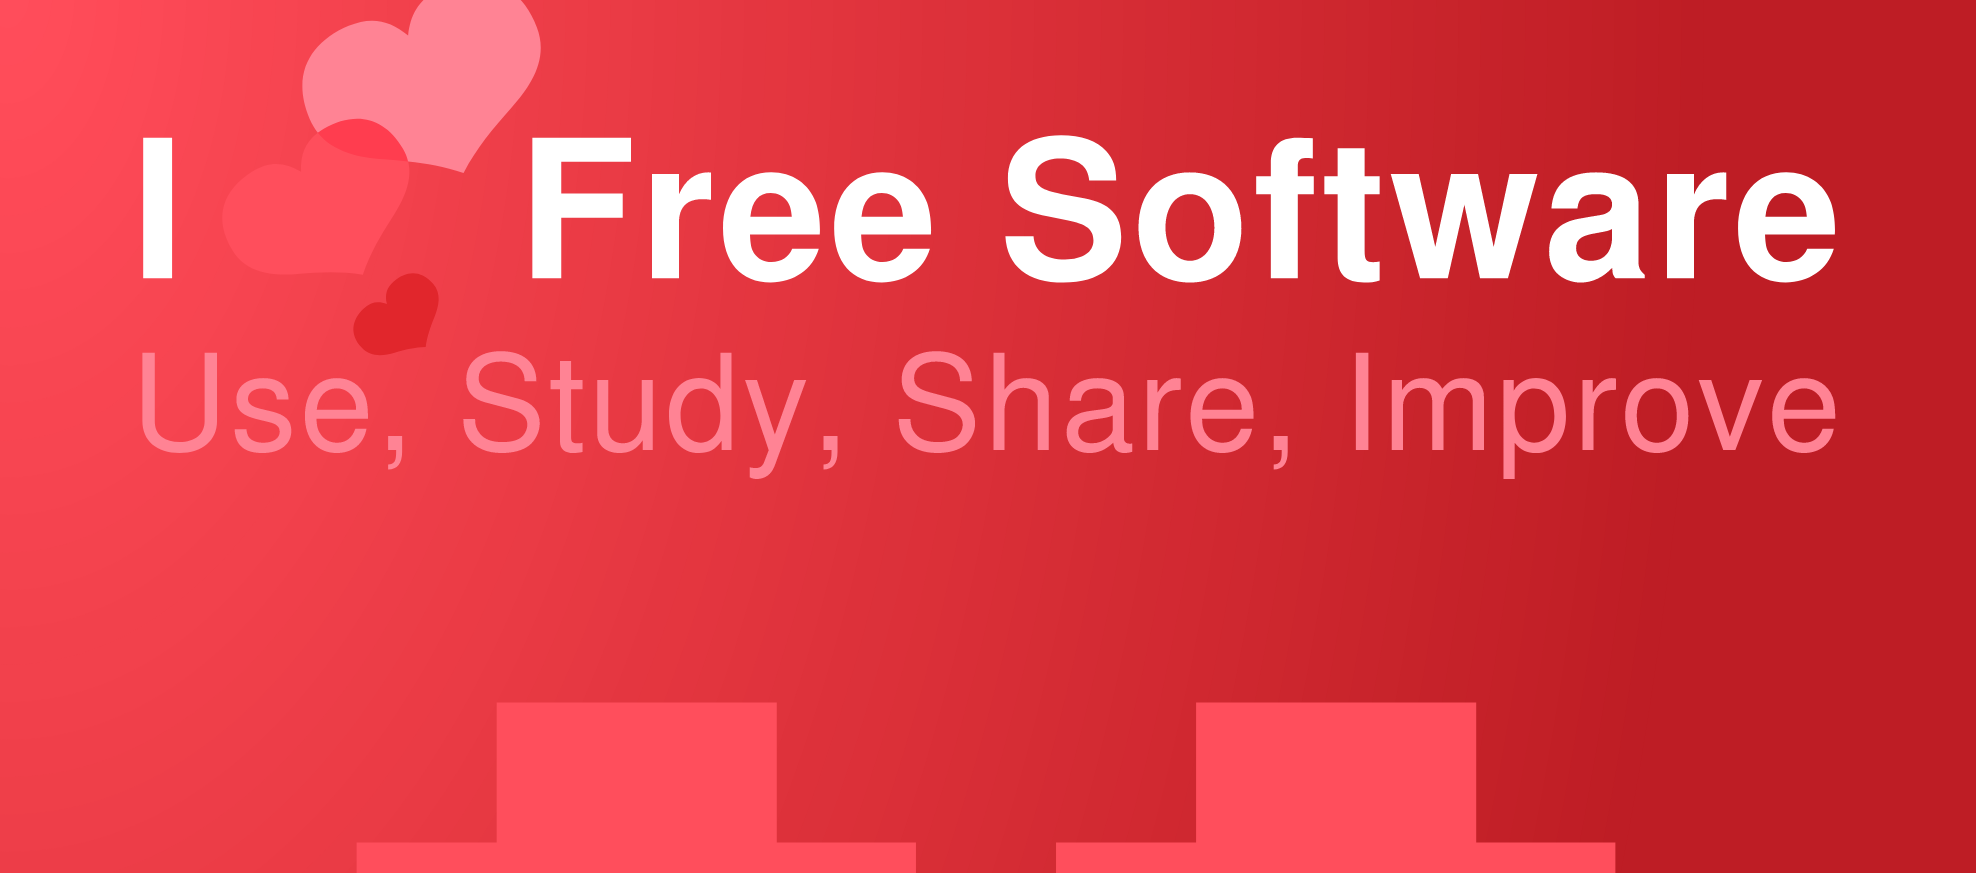 I love Free Software Day